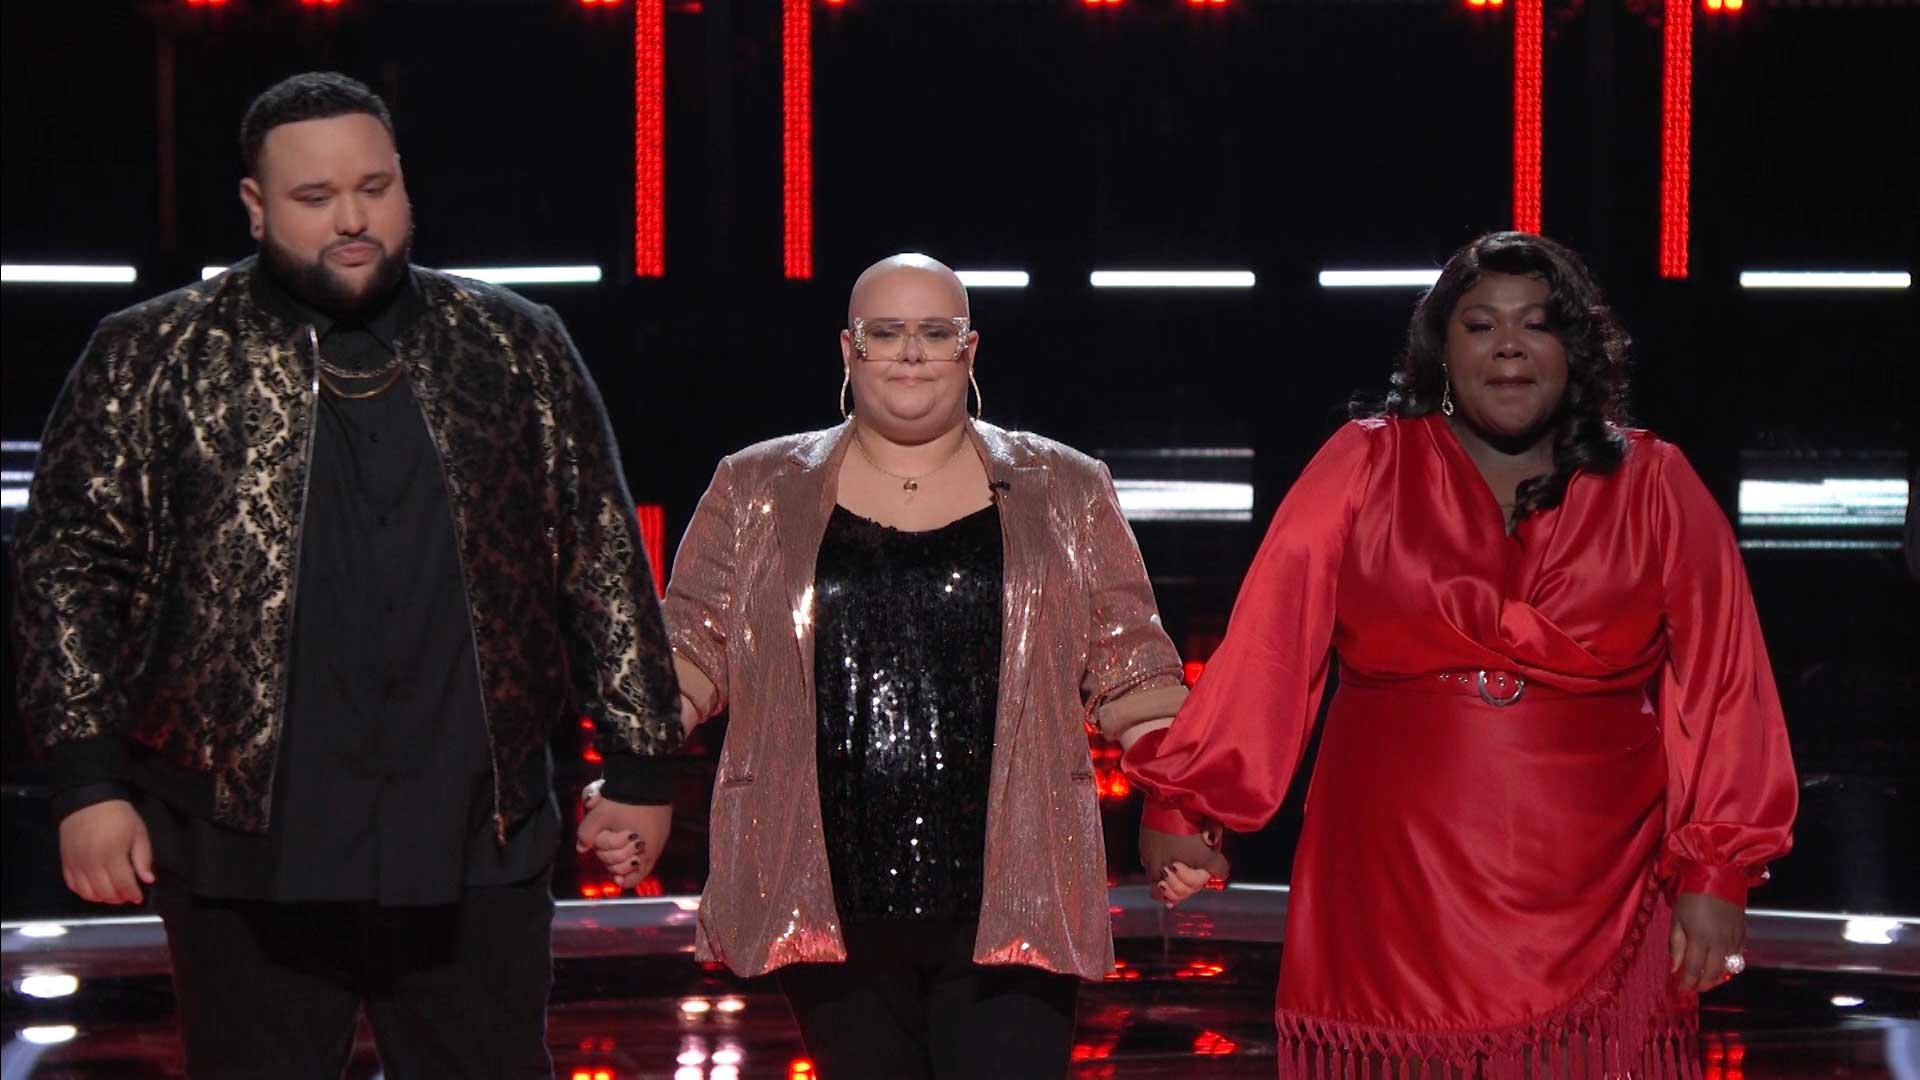 Watch The Voice Highlight Who Will Win the Instant Save? NBC's The